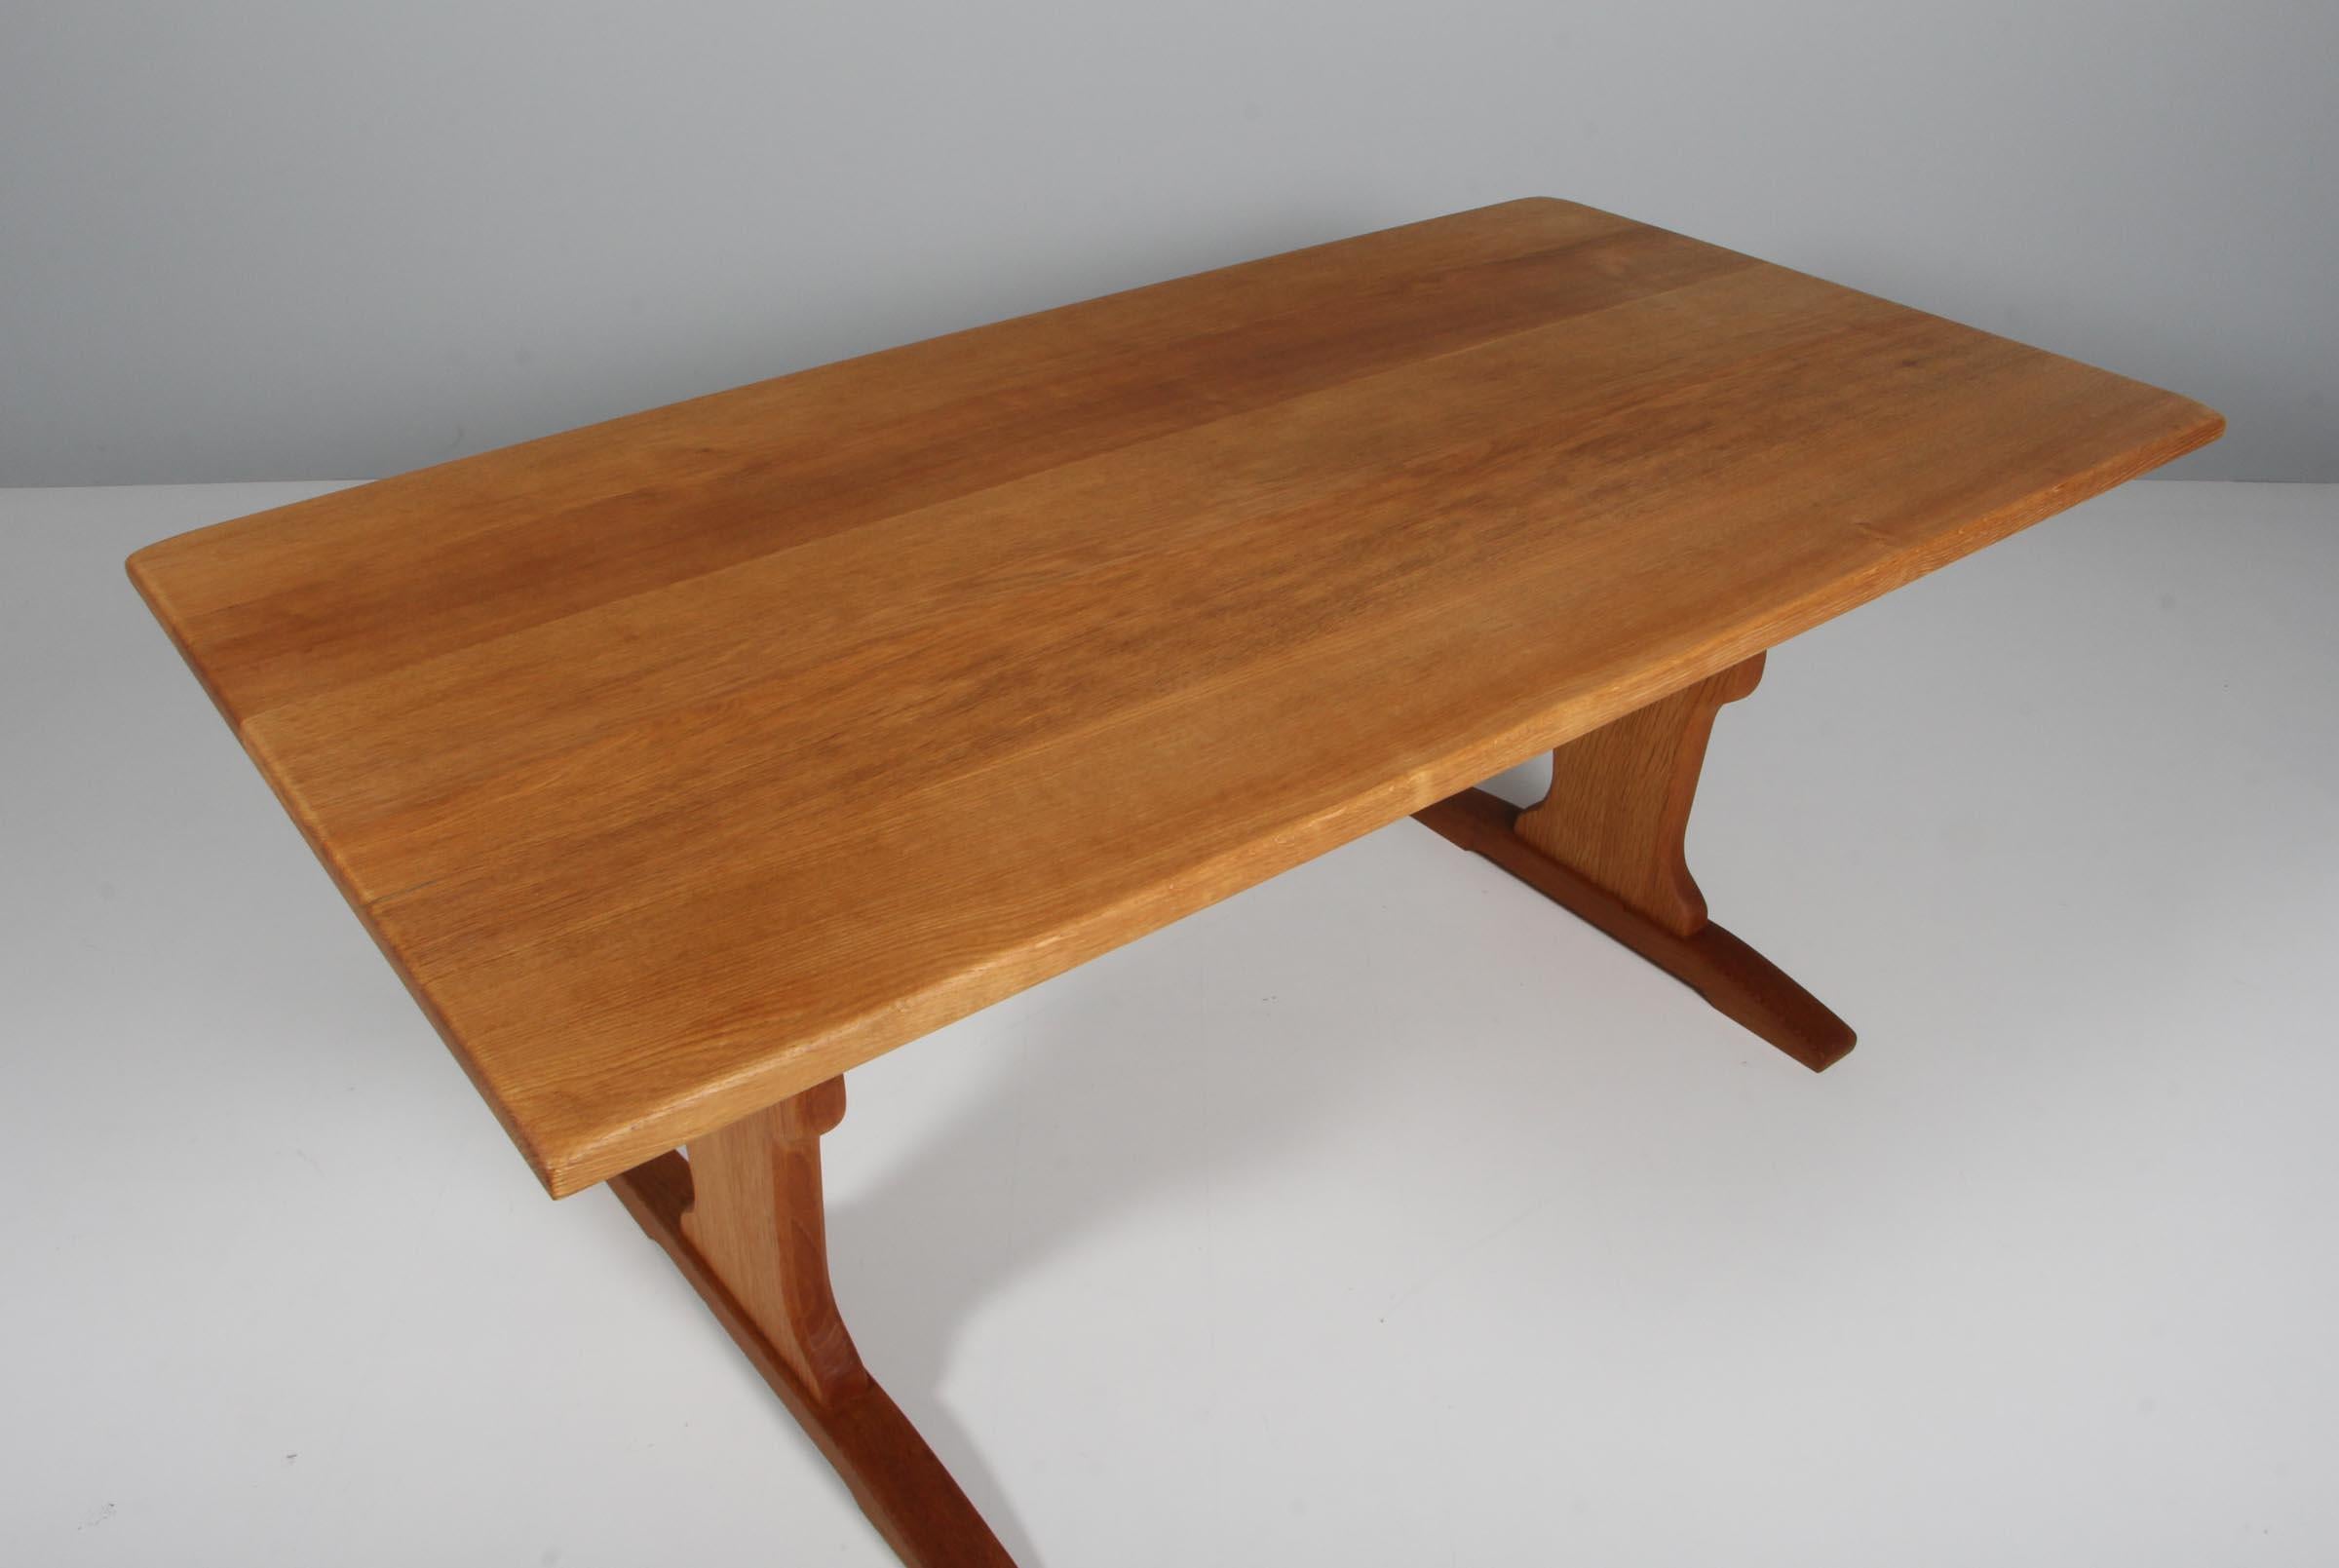 Striking dining table in oak with two extension leafes of 45 cm. By Henry Kjærnulf. 

Refreshing design with bold Baroque coming together nicely with Mid-Century Modernism.

Made by EG møbler in the 1970s.

Perfect match for Henry Kjærnulf